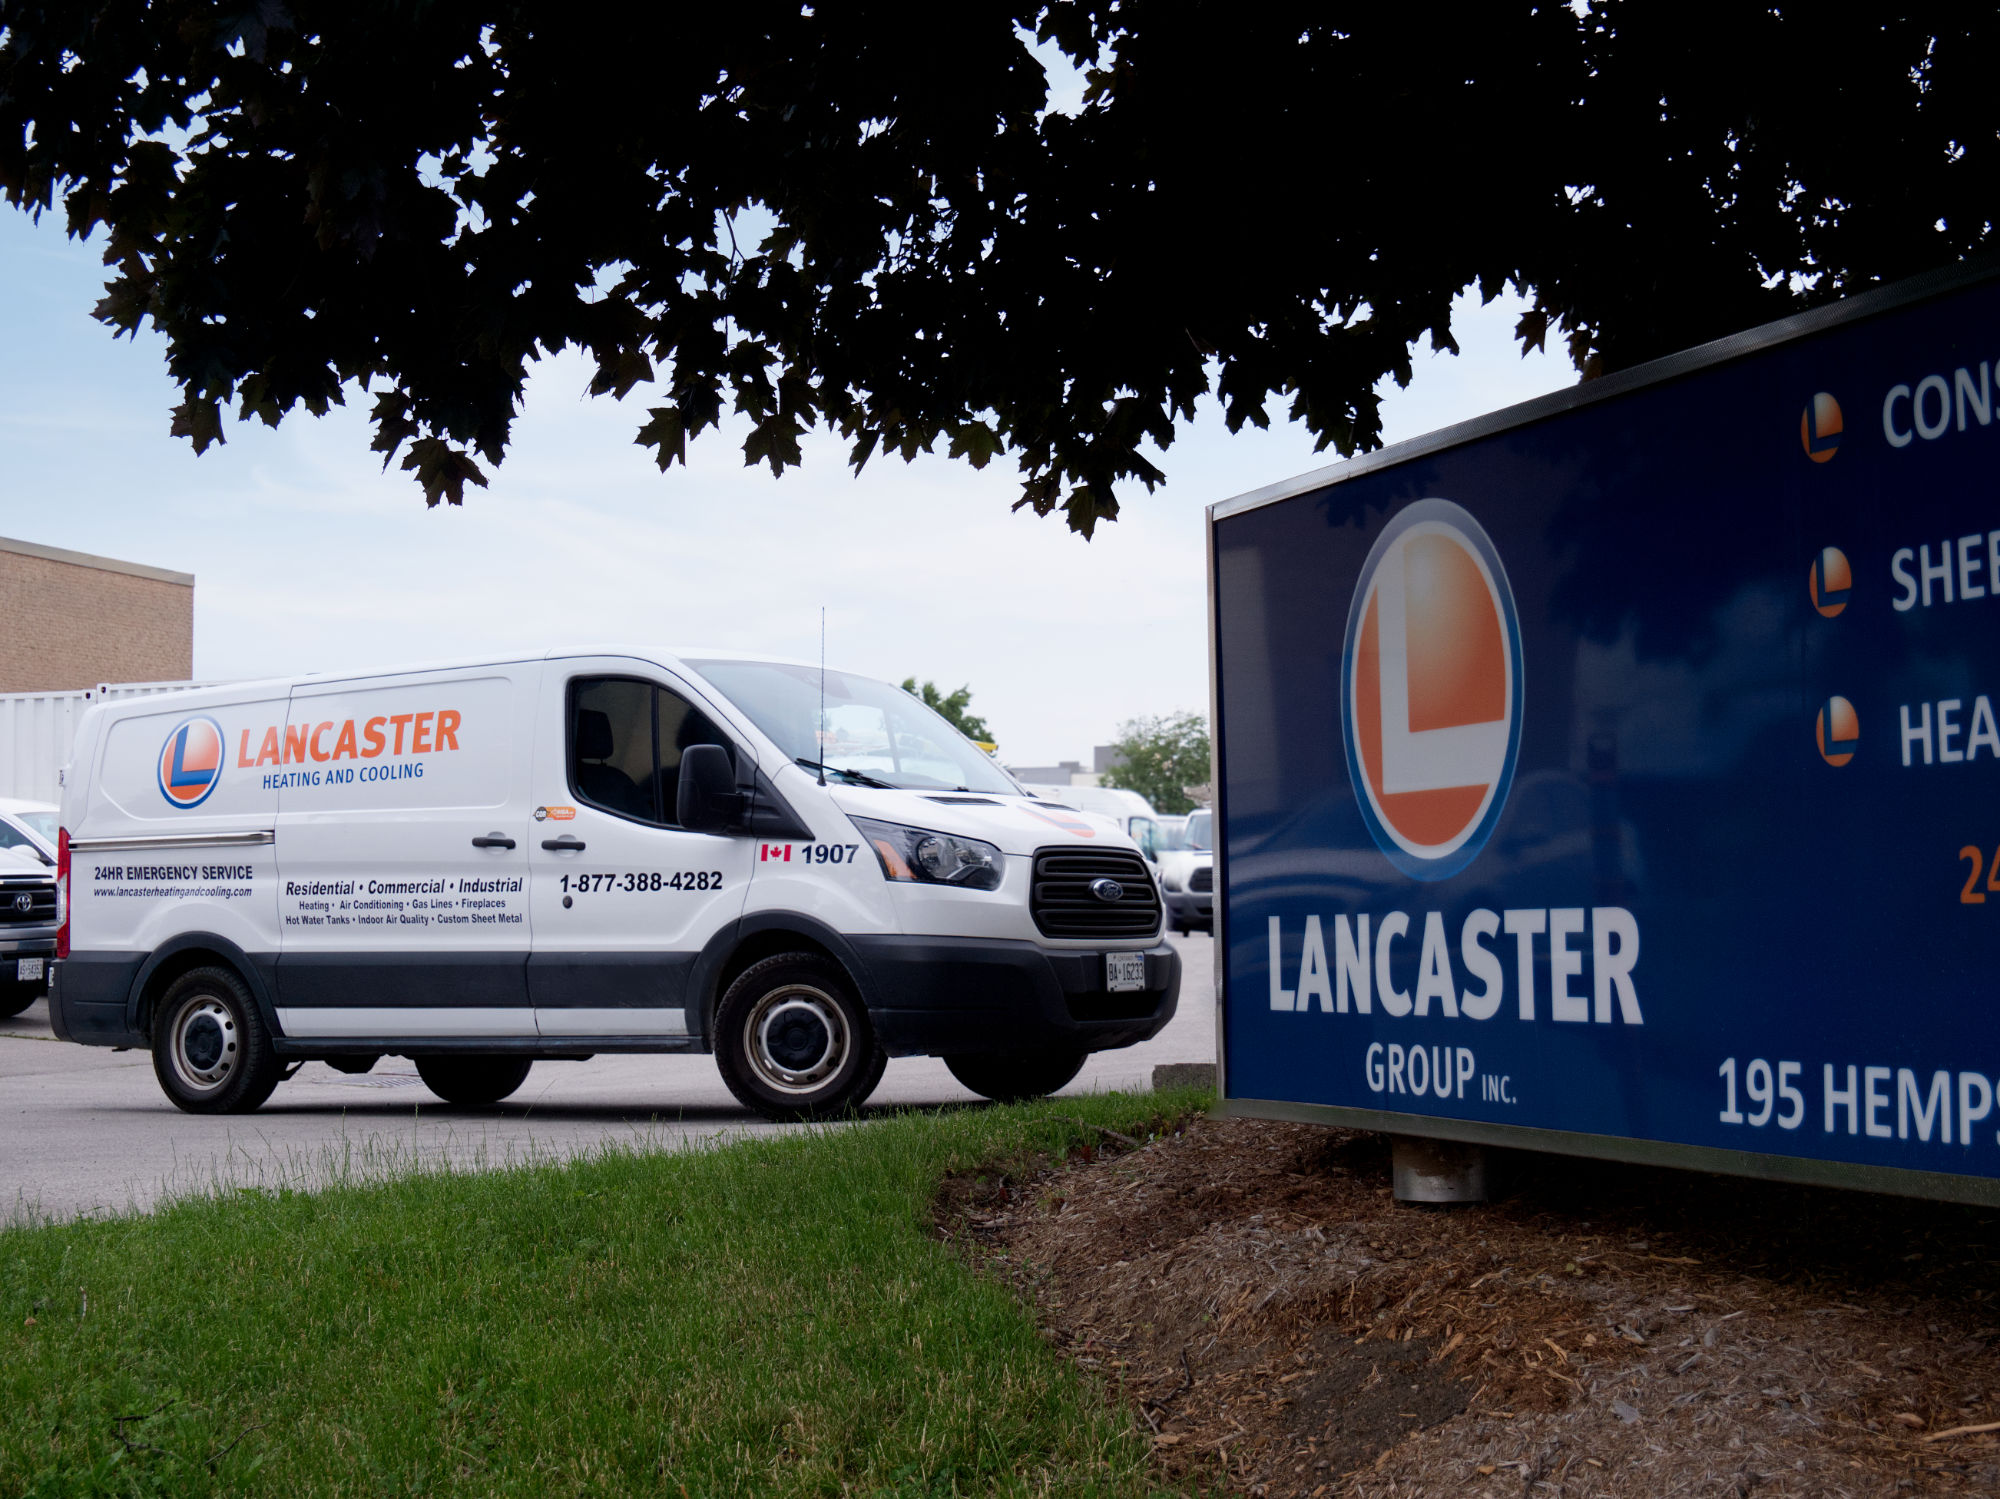 A Lancaster Heating and Cooling van parked outside The Lancaster Group Inc home office in Hamilton, ON.